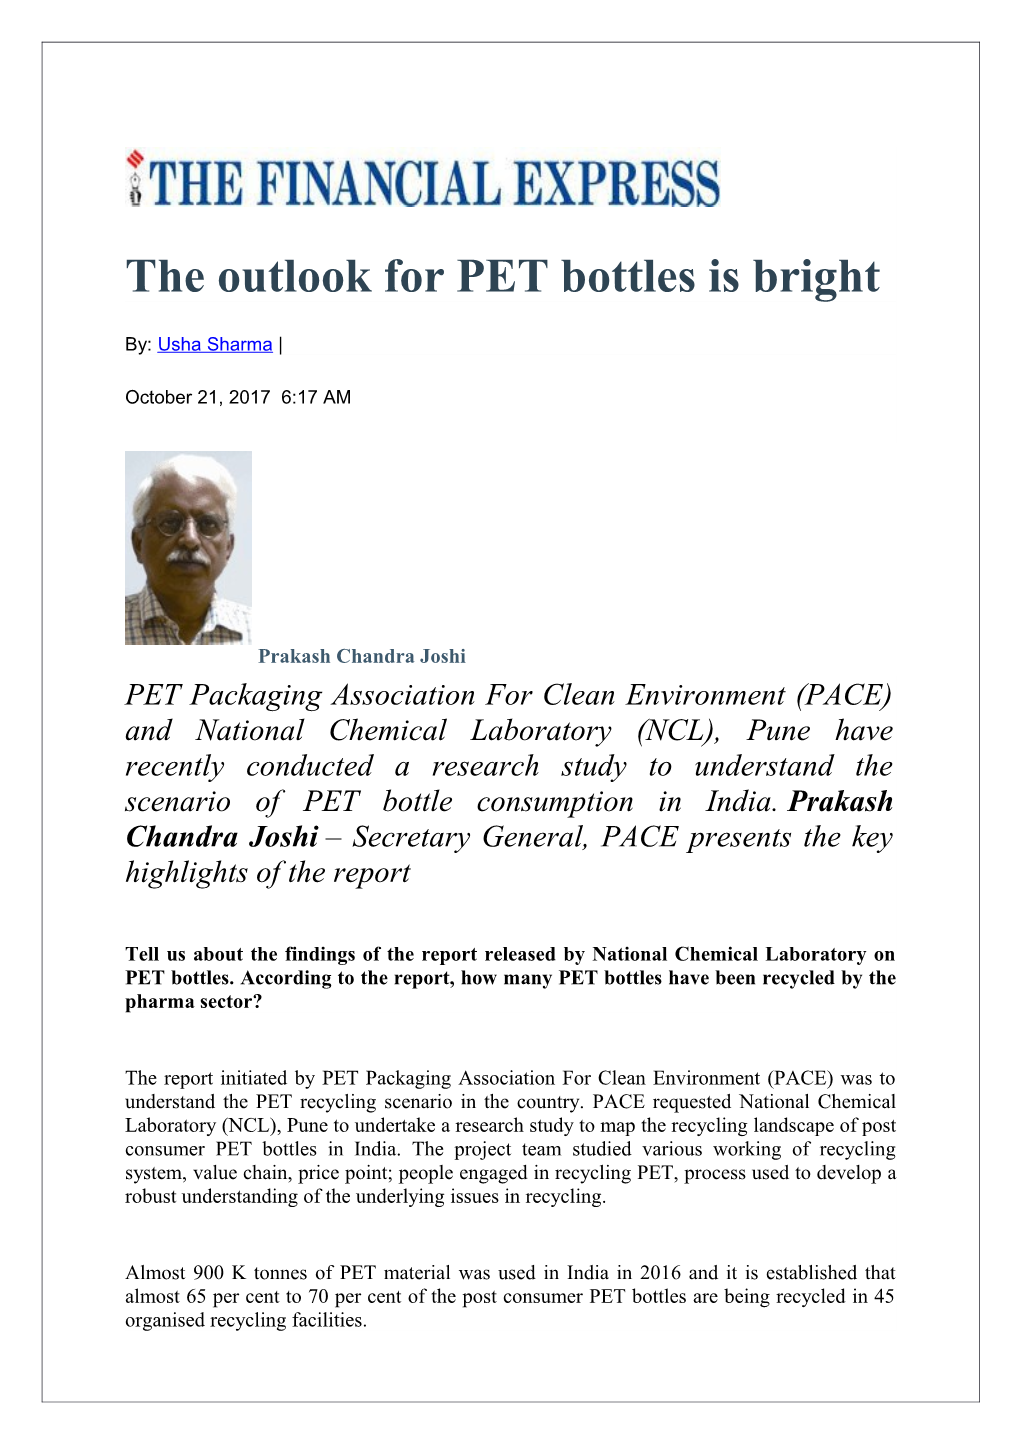 The Outlook for PET Bottles Is Bright